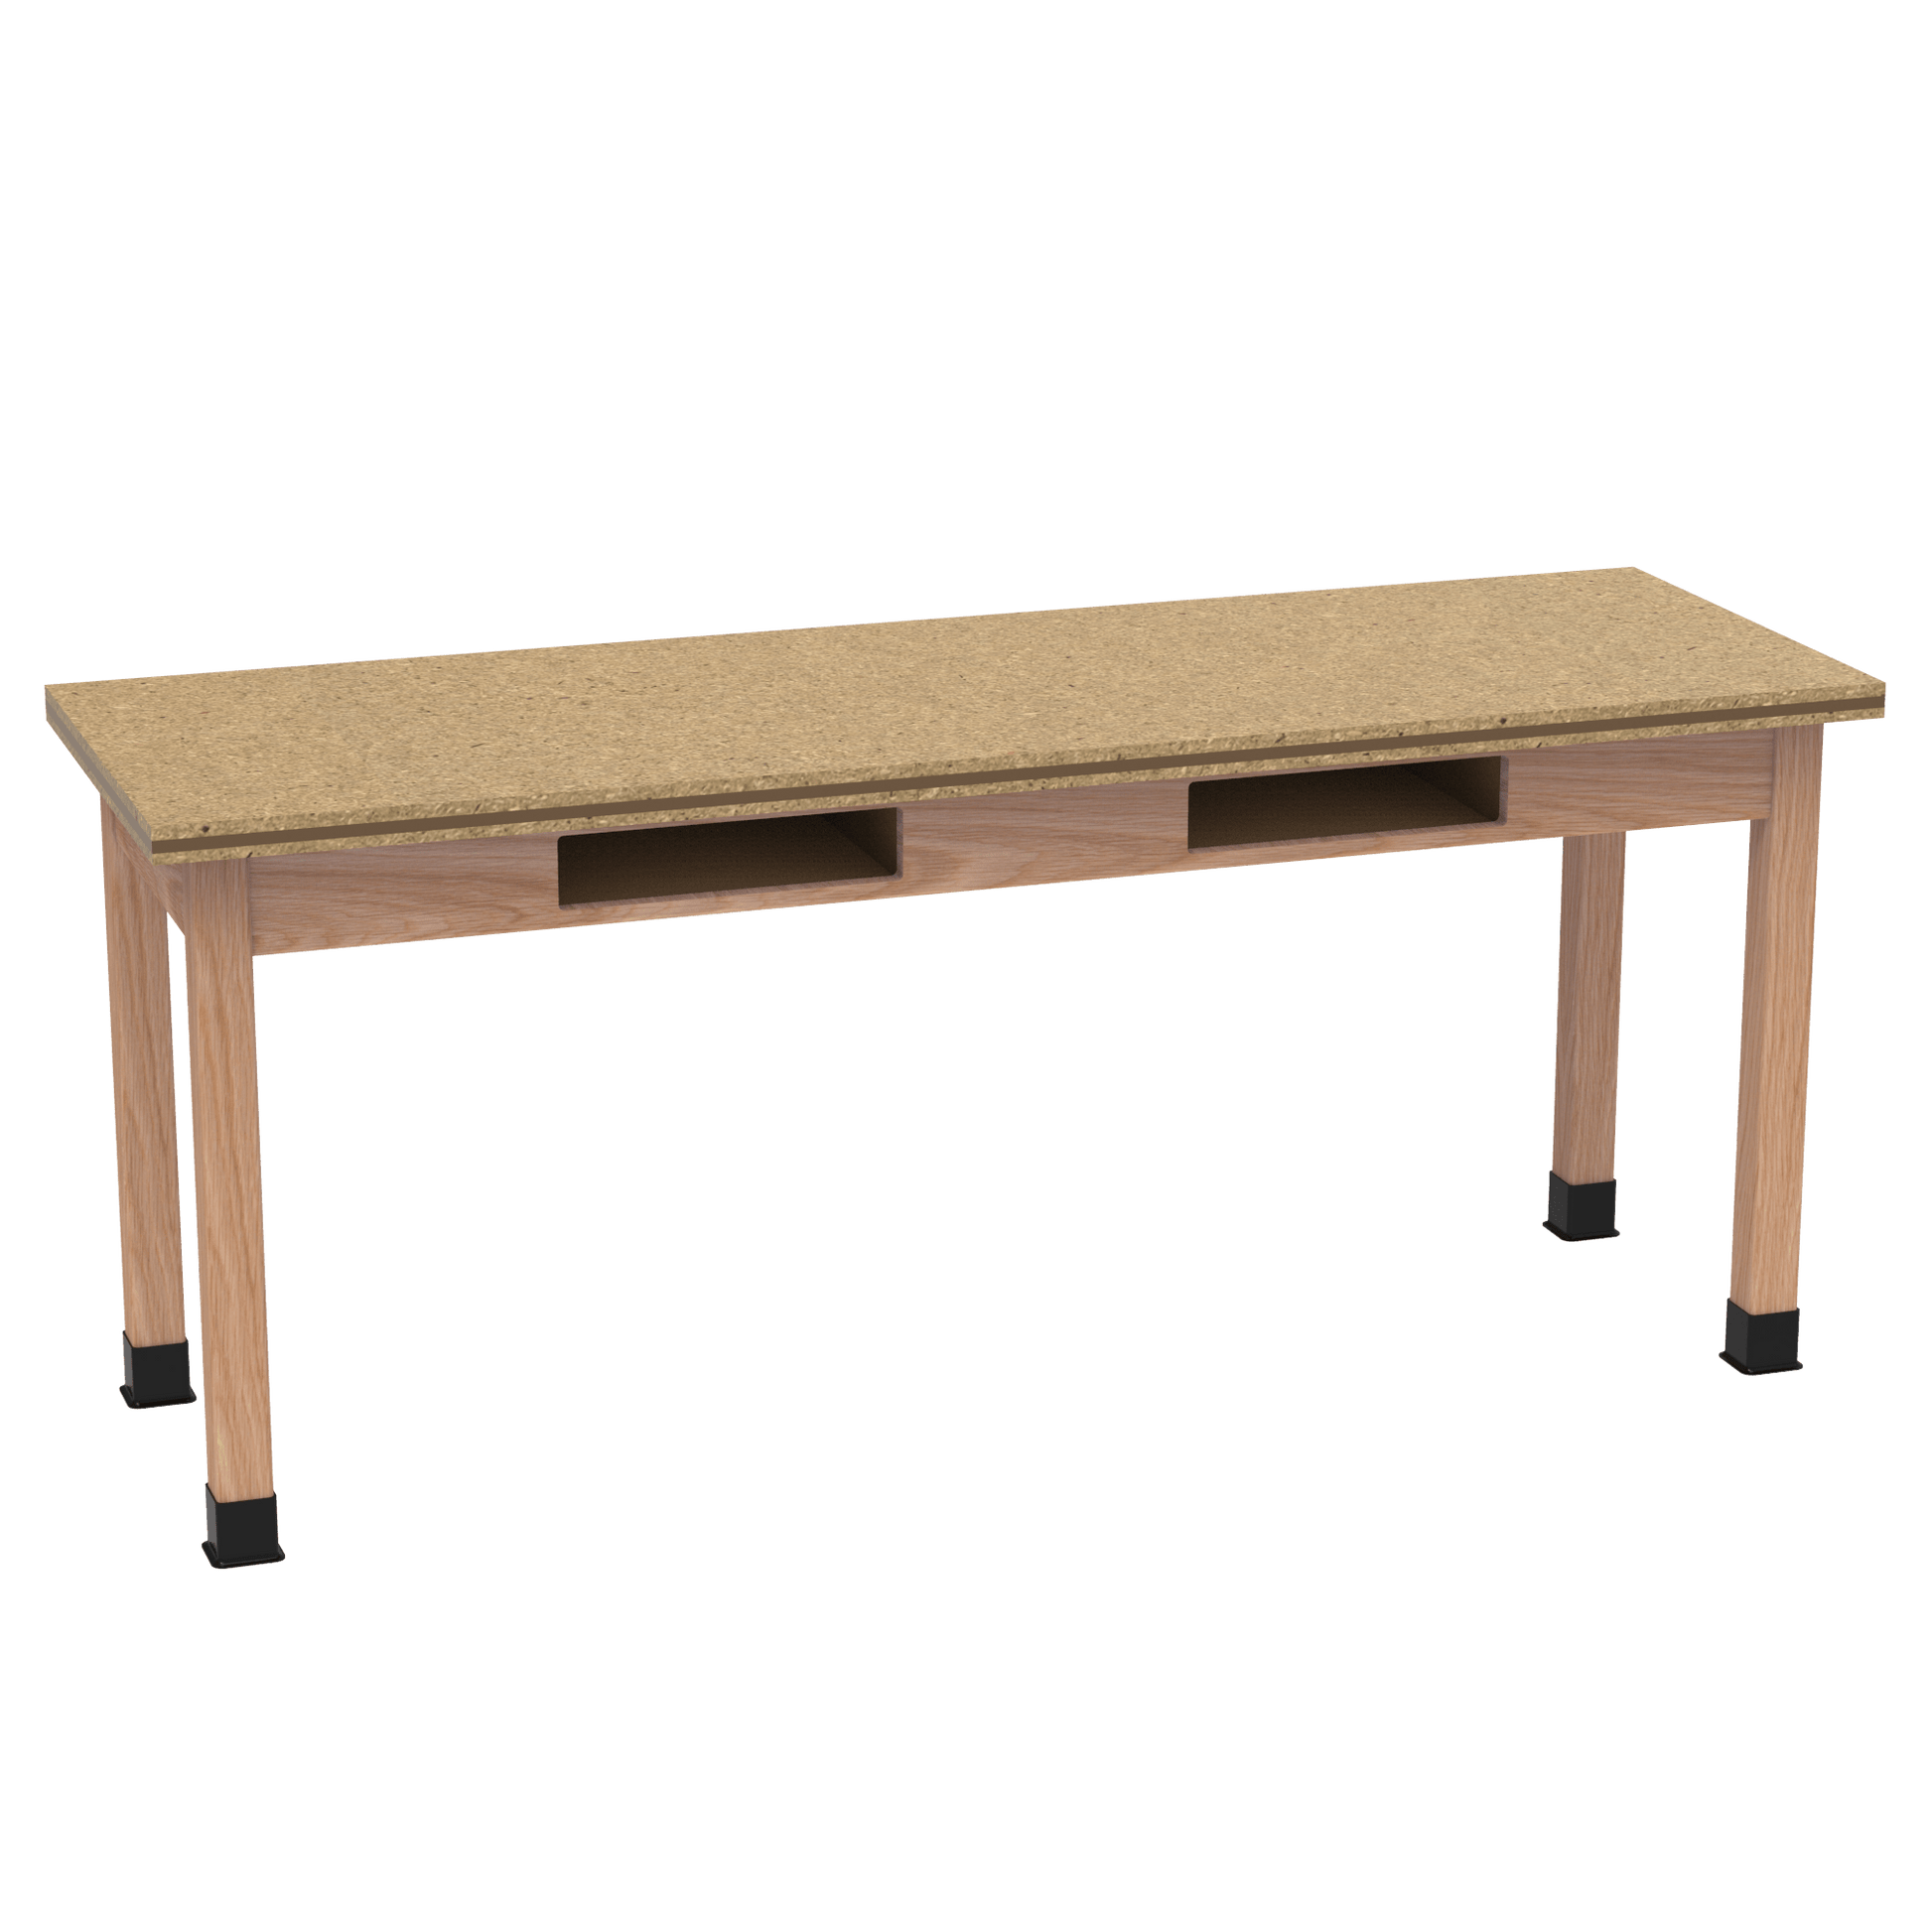 Diversified Woodcrafts Science Table w/ Book Compartment - 72" W x 36" D - Solid Oak Frame and Adjustable Glides - SchoolOutlet